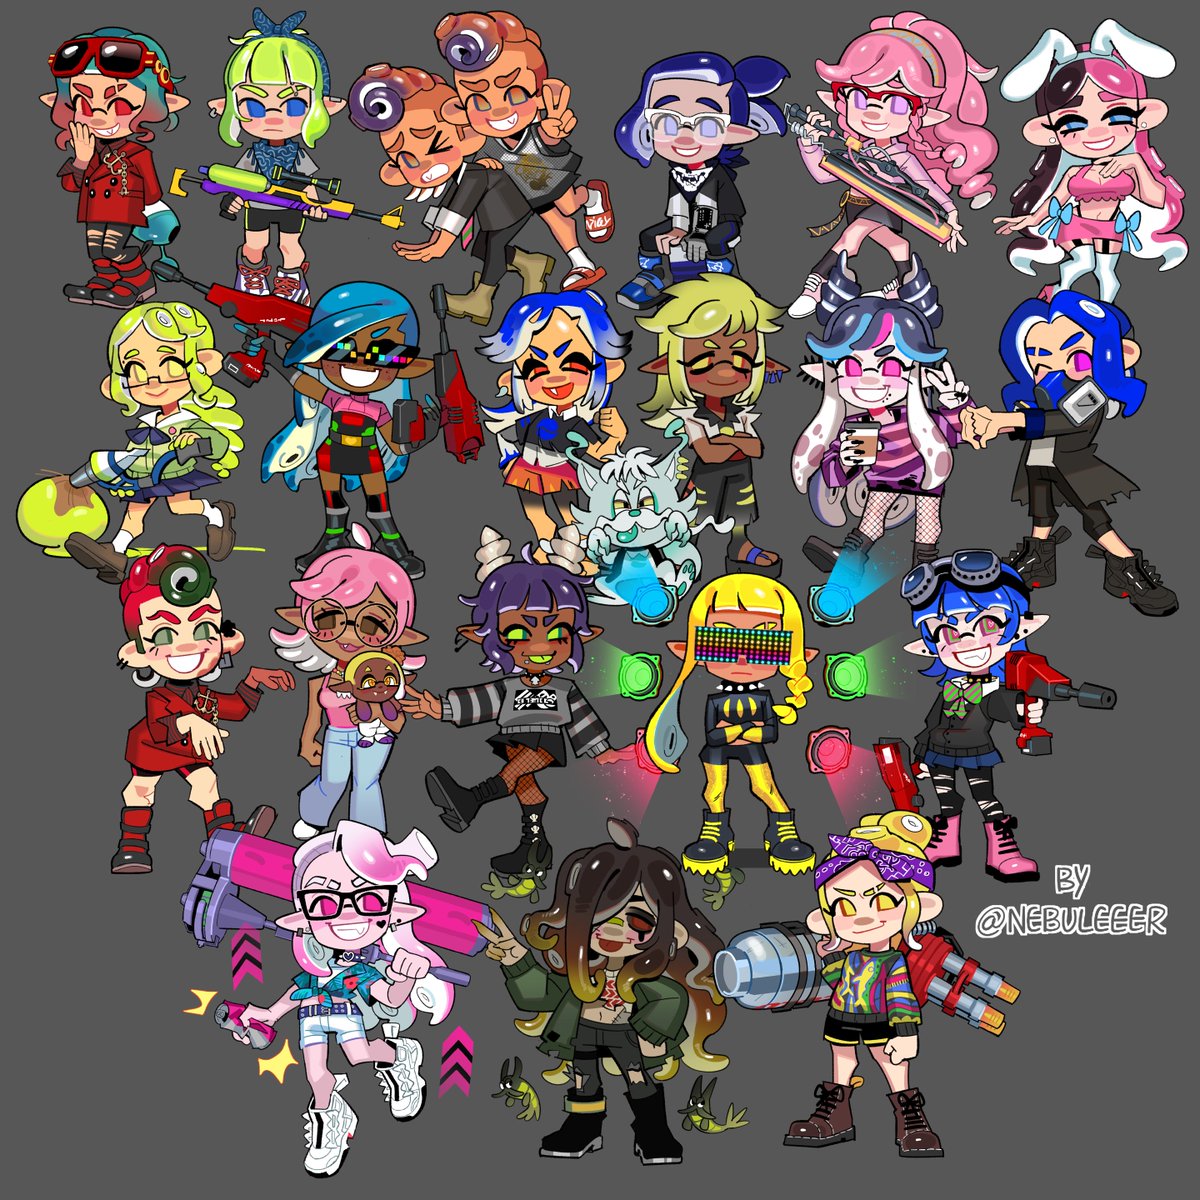 all the splatoon chibis ive done so far. i just wanted to see them all together. still have my waitlist open hehe